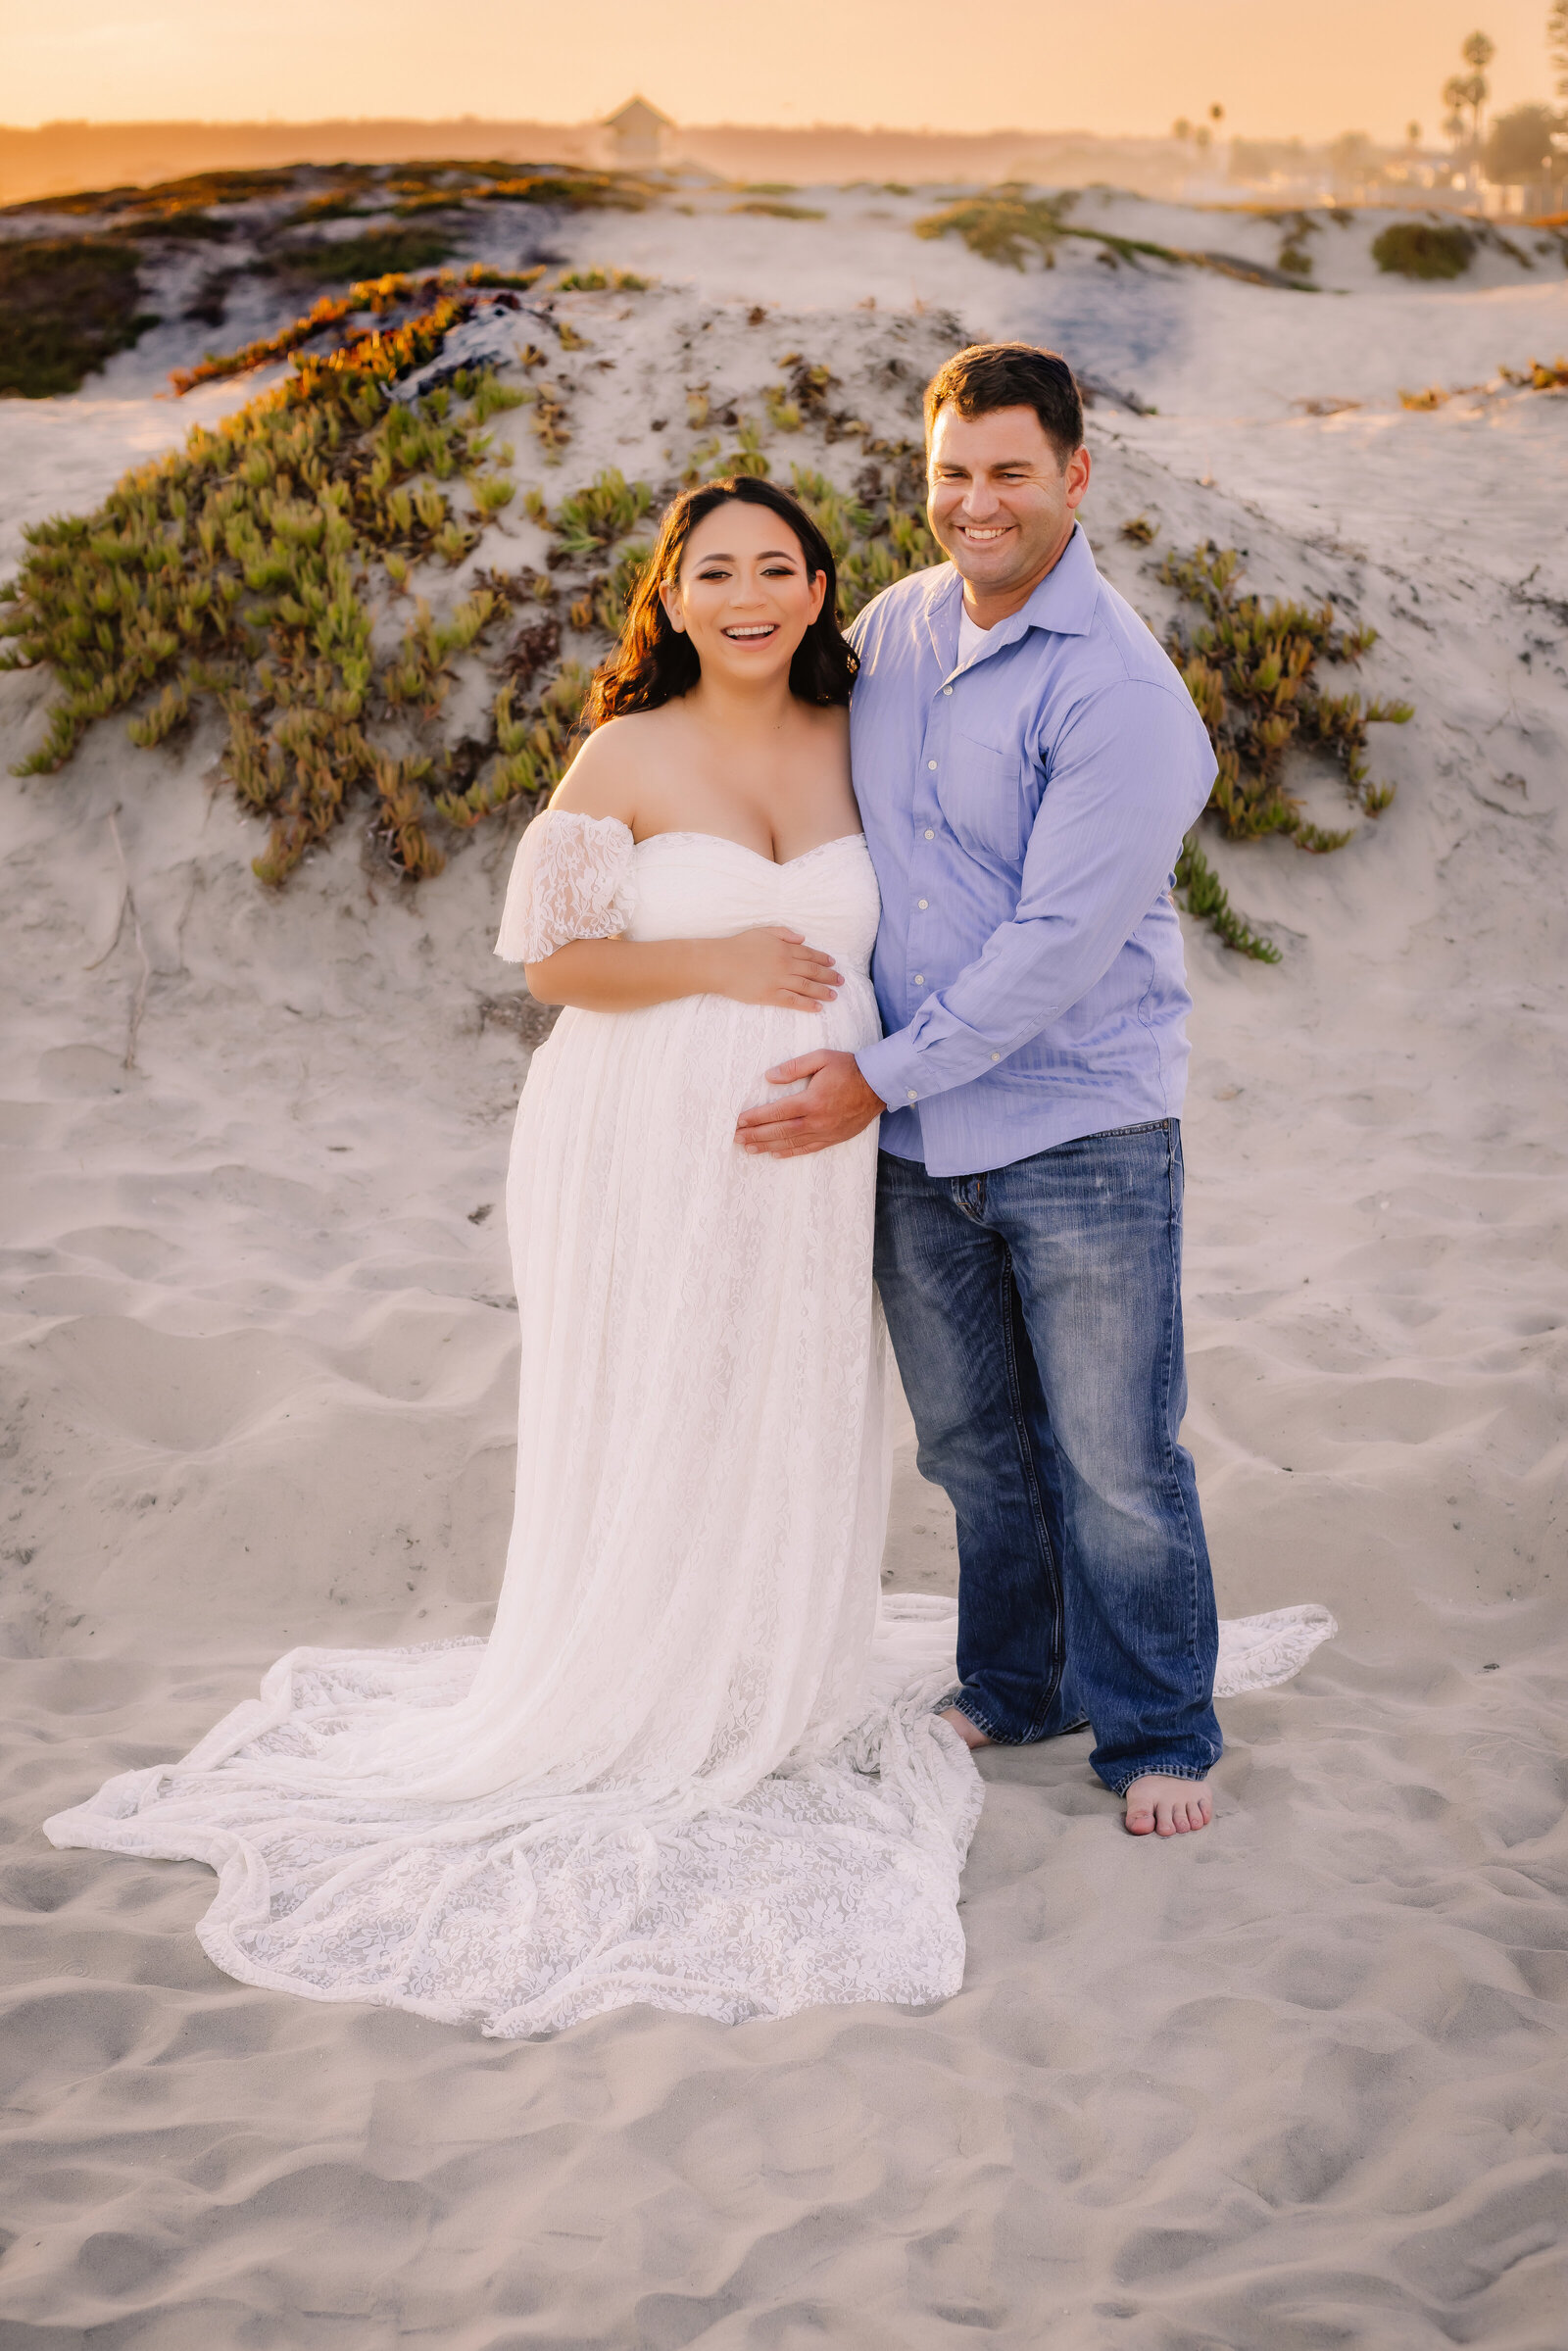 Maternity Photographer, a man and woman hold each other in the sand, she is expecting